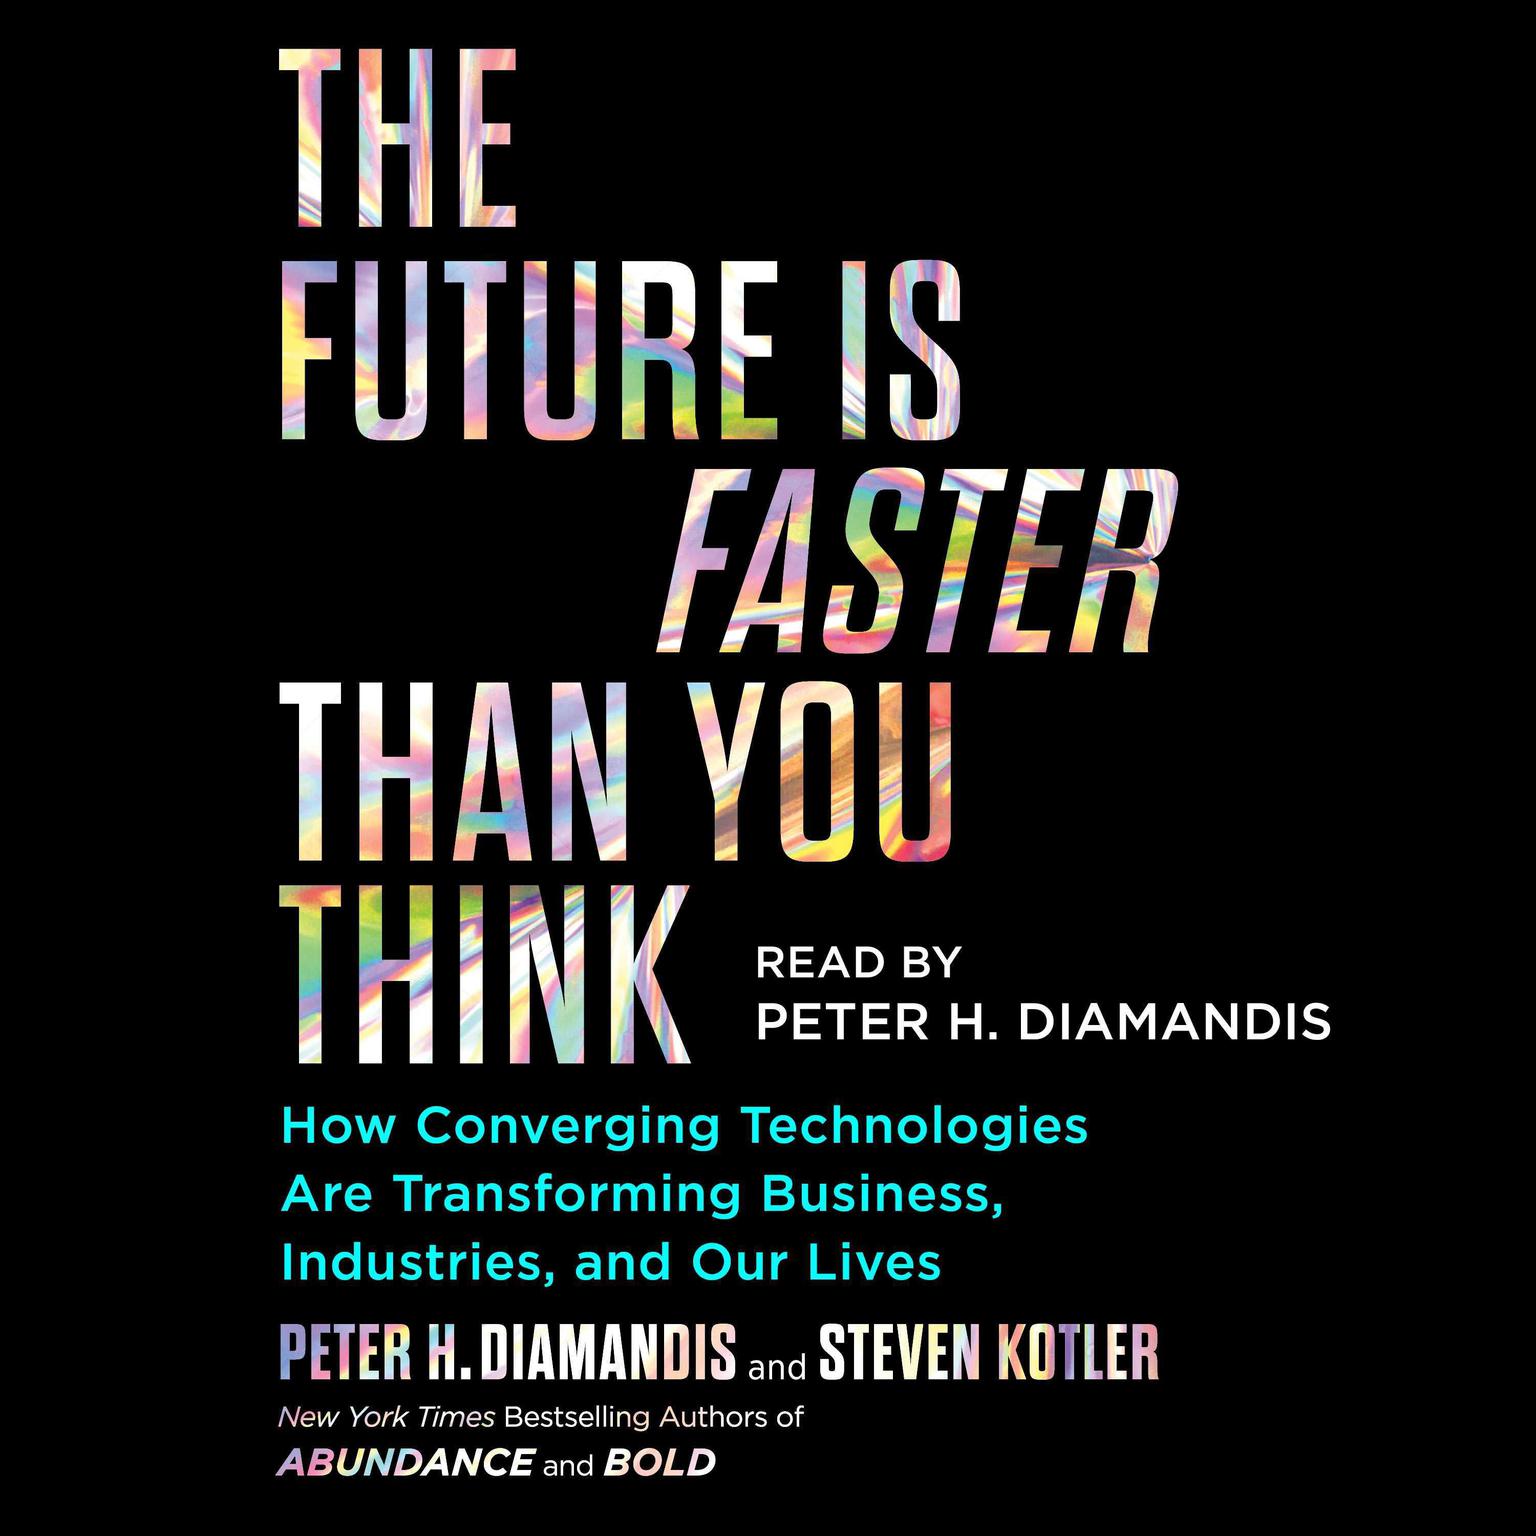 The Future Is Faster Than You Think: How Converging Technologies Are Transforming Business, Industries, and Our Lives Audiobook, by Peter H. Diamandis